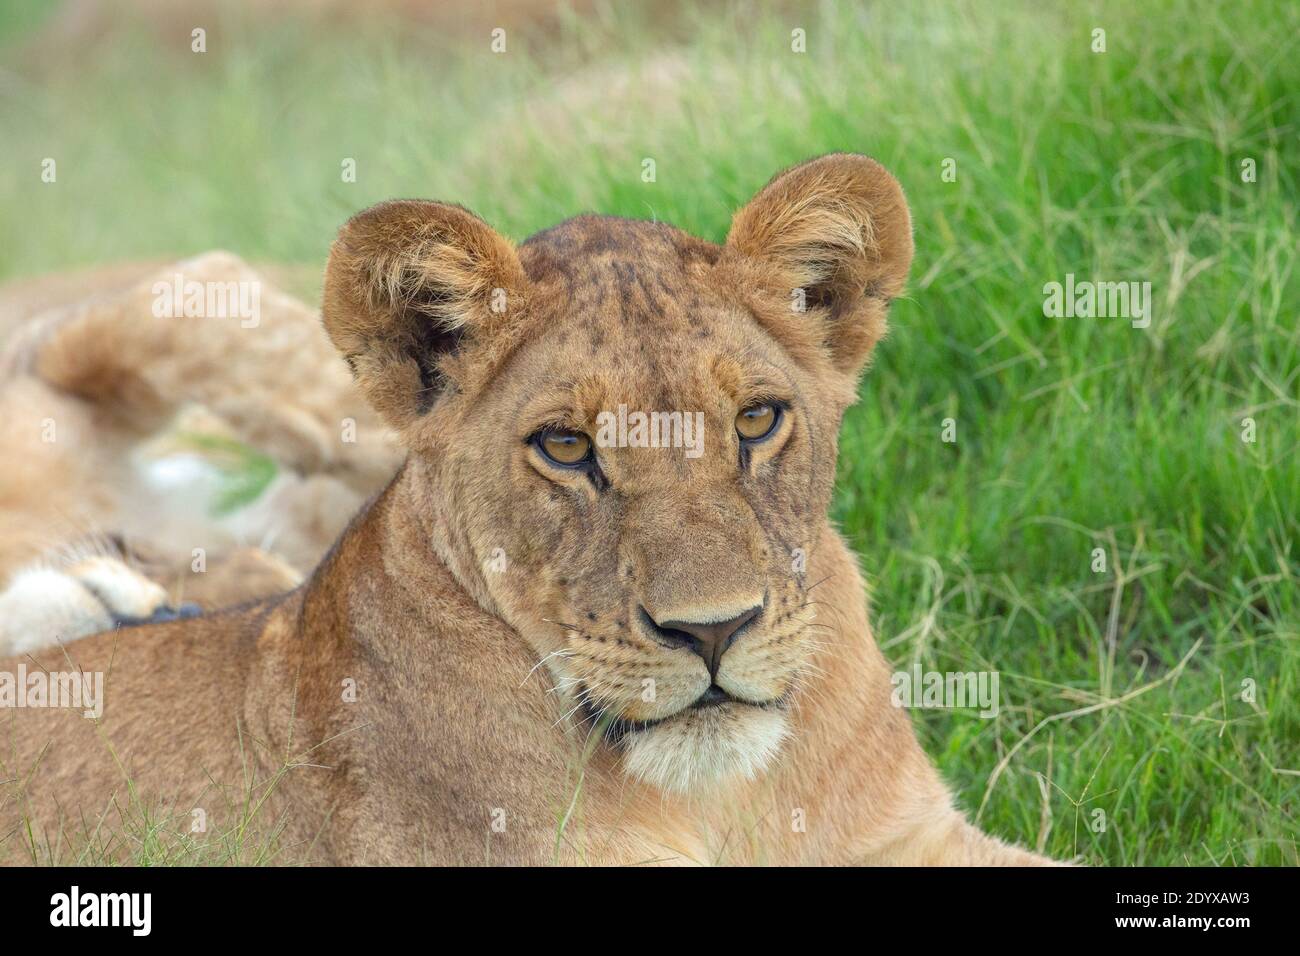 African Lioness (Panthera lio),  Head detail, facial features. Full eye contact. Comparitively large ears indicative of a younger animal. Stock Photo